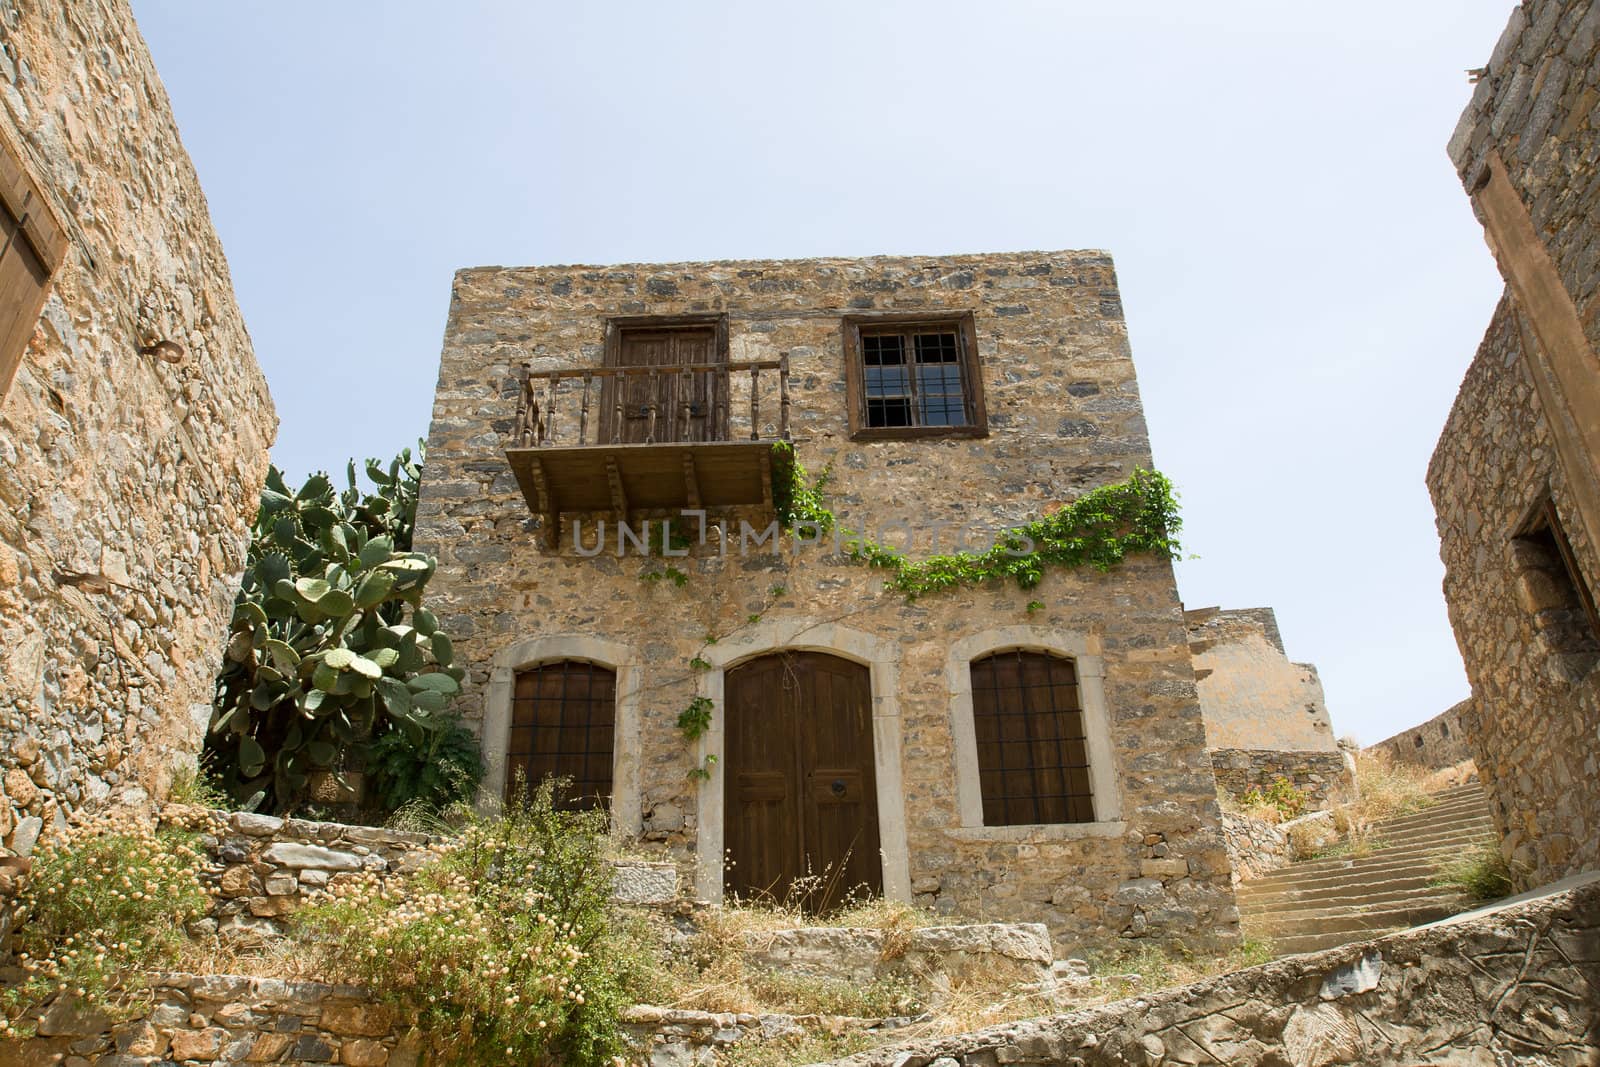 Picturesque old Mediterranean style abandoned lopsided rustic stone house with wooden sun blind, balcony in ancient town